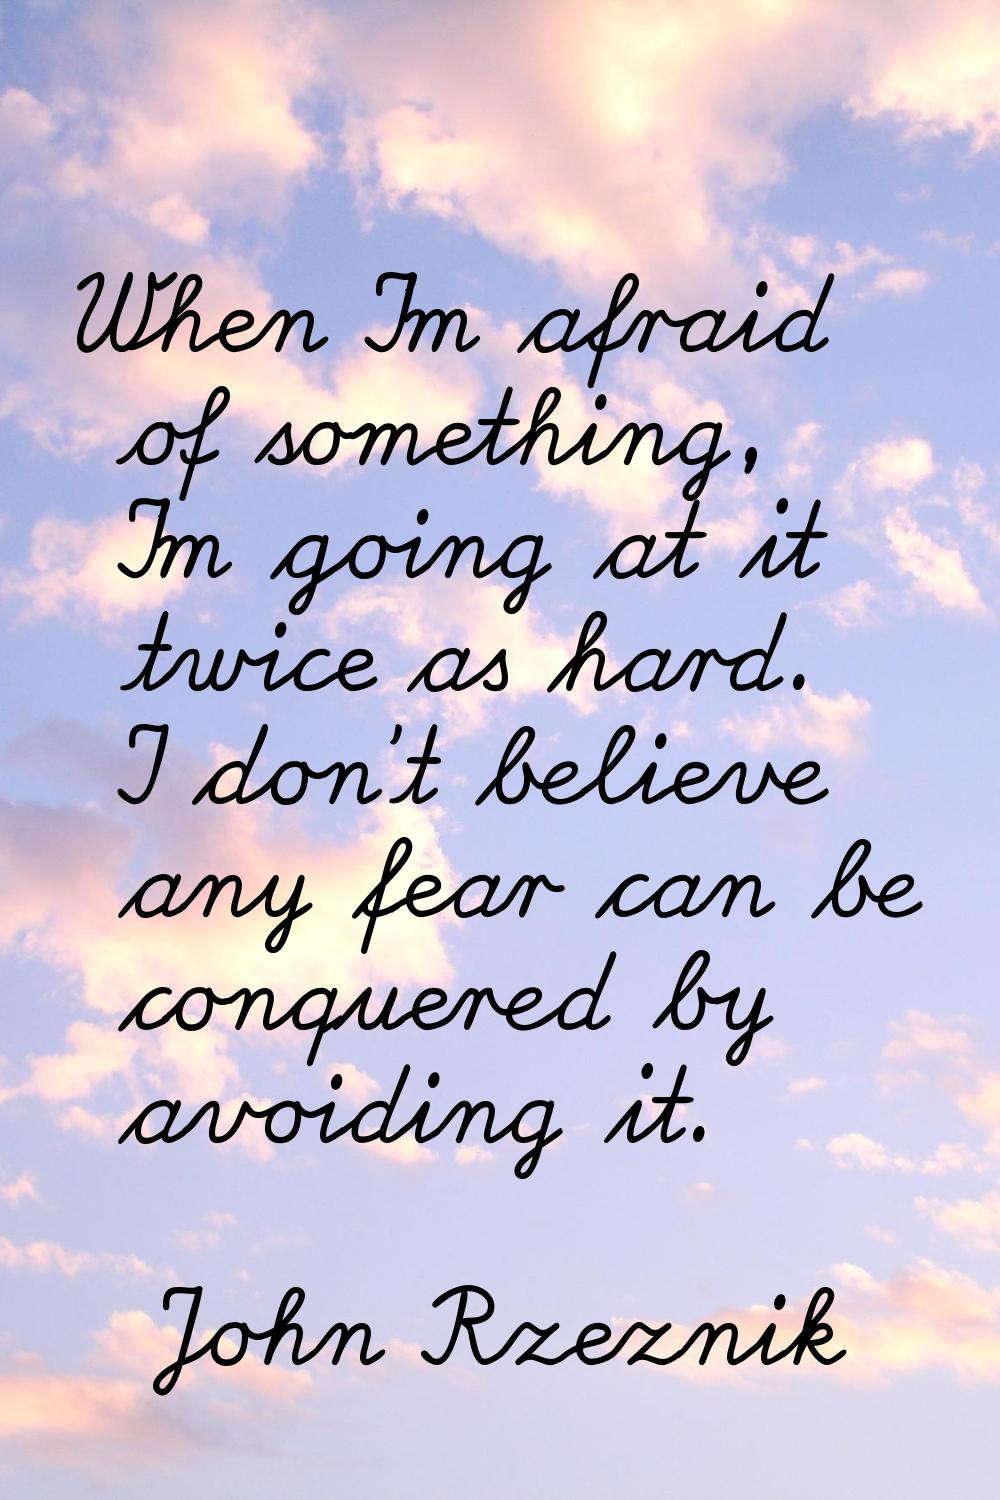 When I'm afraid of something, I'm going at it twice as hard. I don't believe any fear can be conque